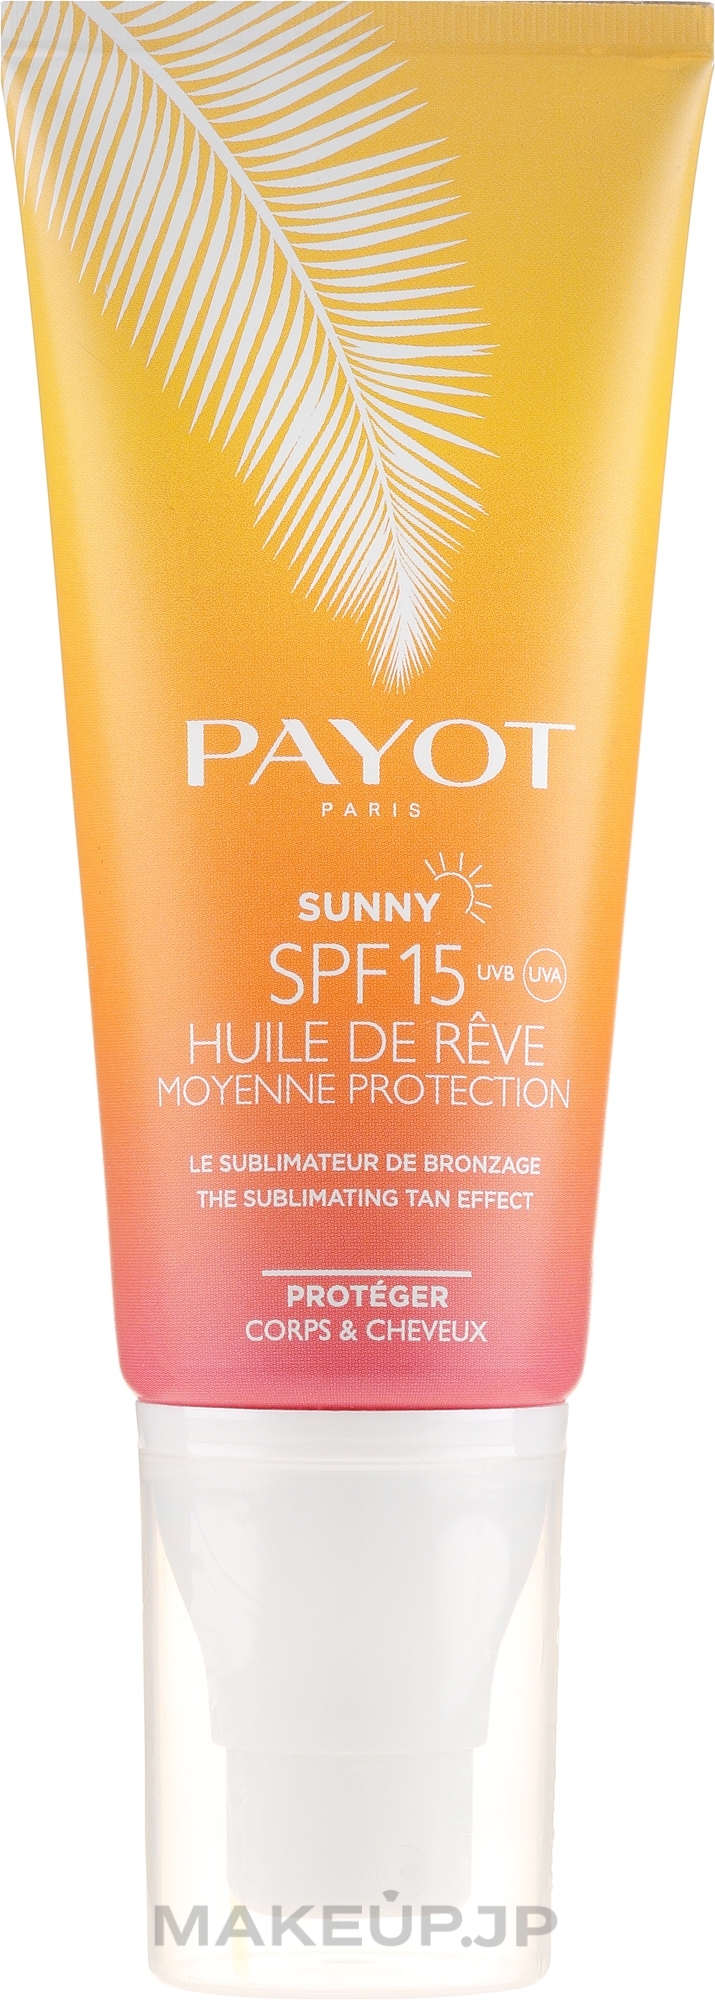 Payot - Sunny The Sublimating Tan Effect Body and Hair SPF 15 — photo 100 ml